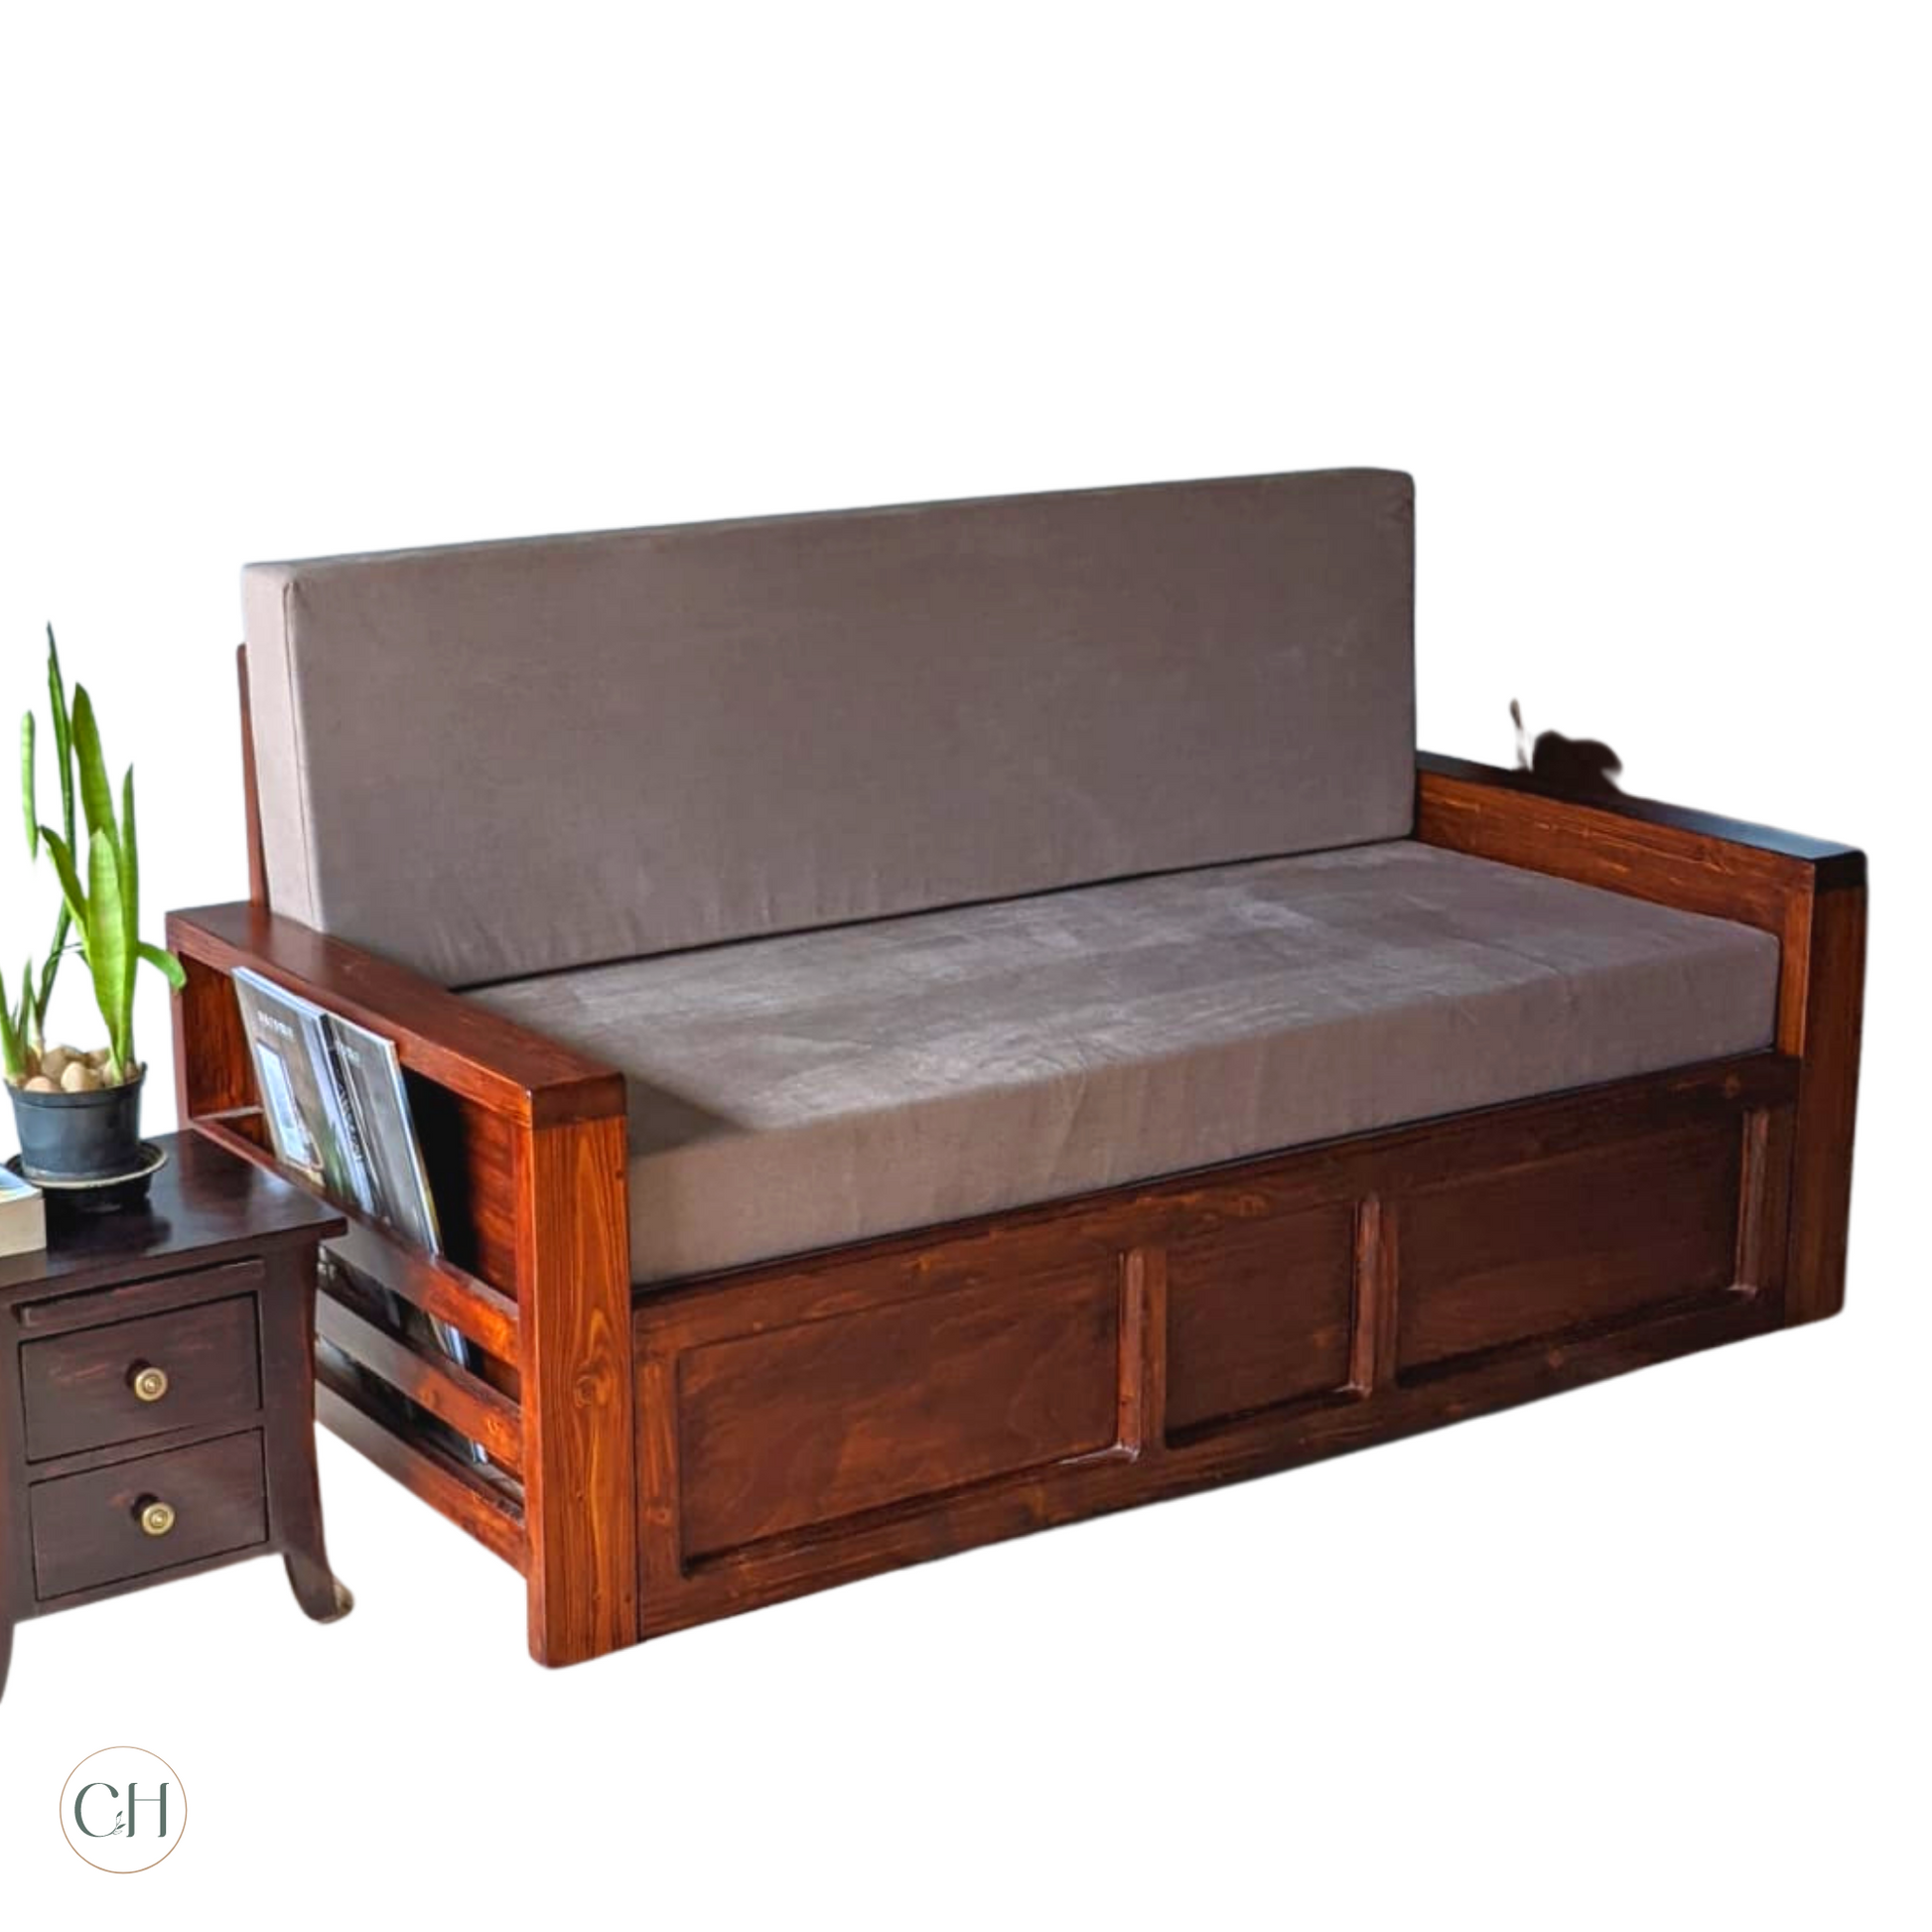 CustHum-Helen-expandable sofa cum bed with magazine holder on either side, cushion mattress (closed ISO)